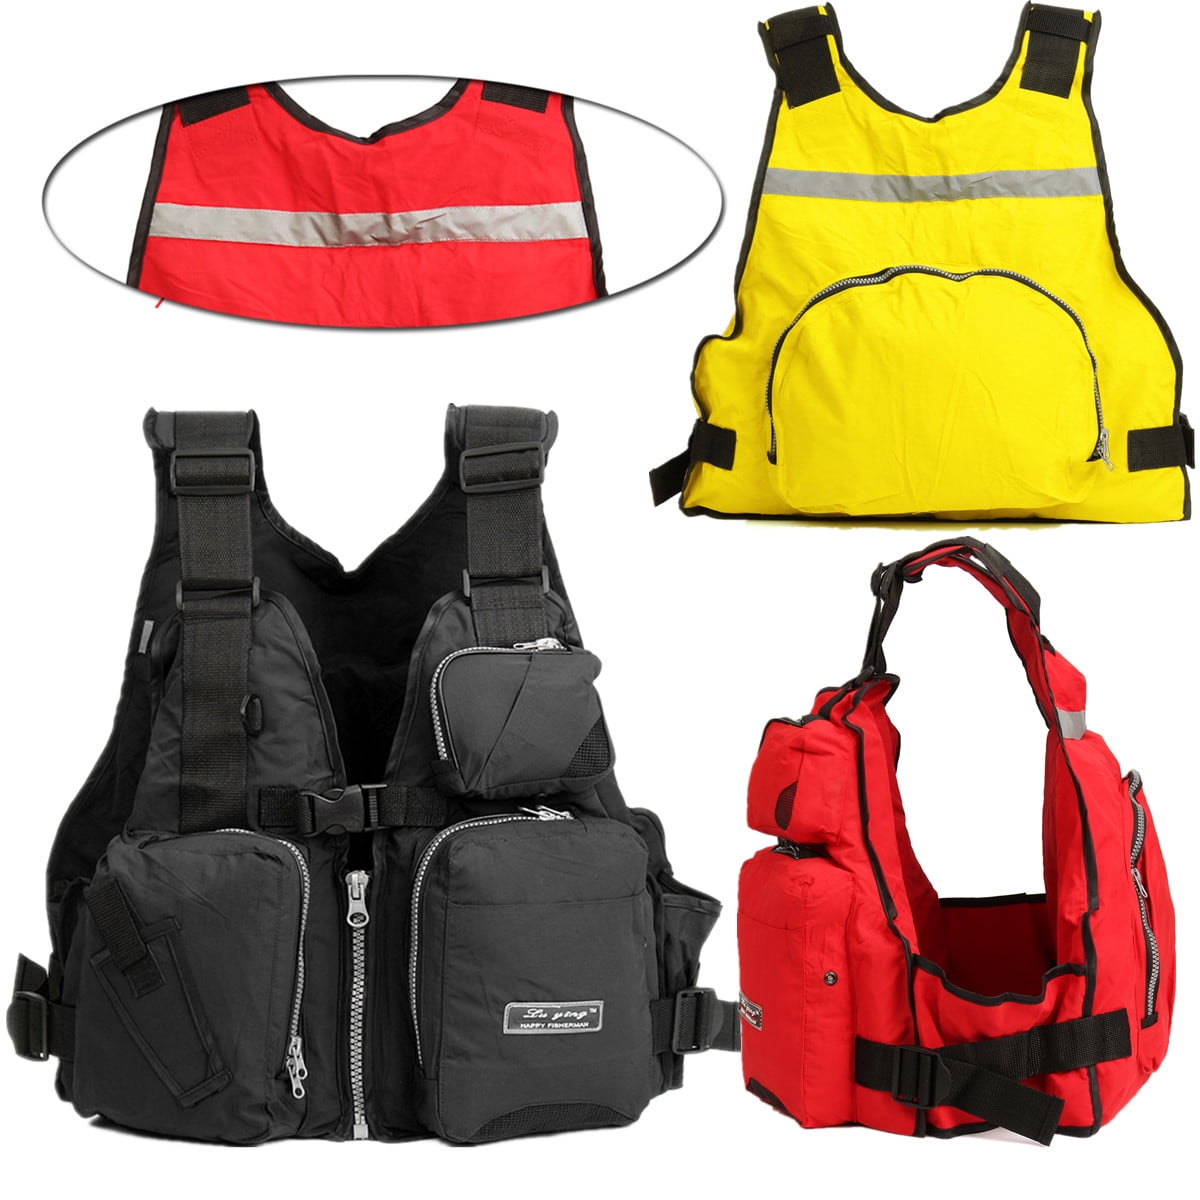 Boat Buoyancy Aid Sailing Kayak Fishing Life Jacket Vest Camouflage D11-Red-AN 